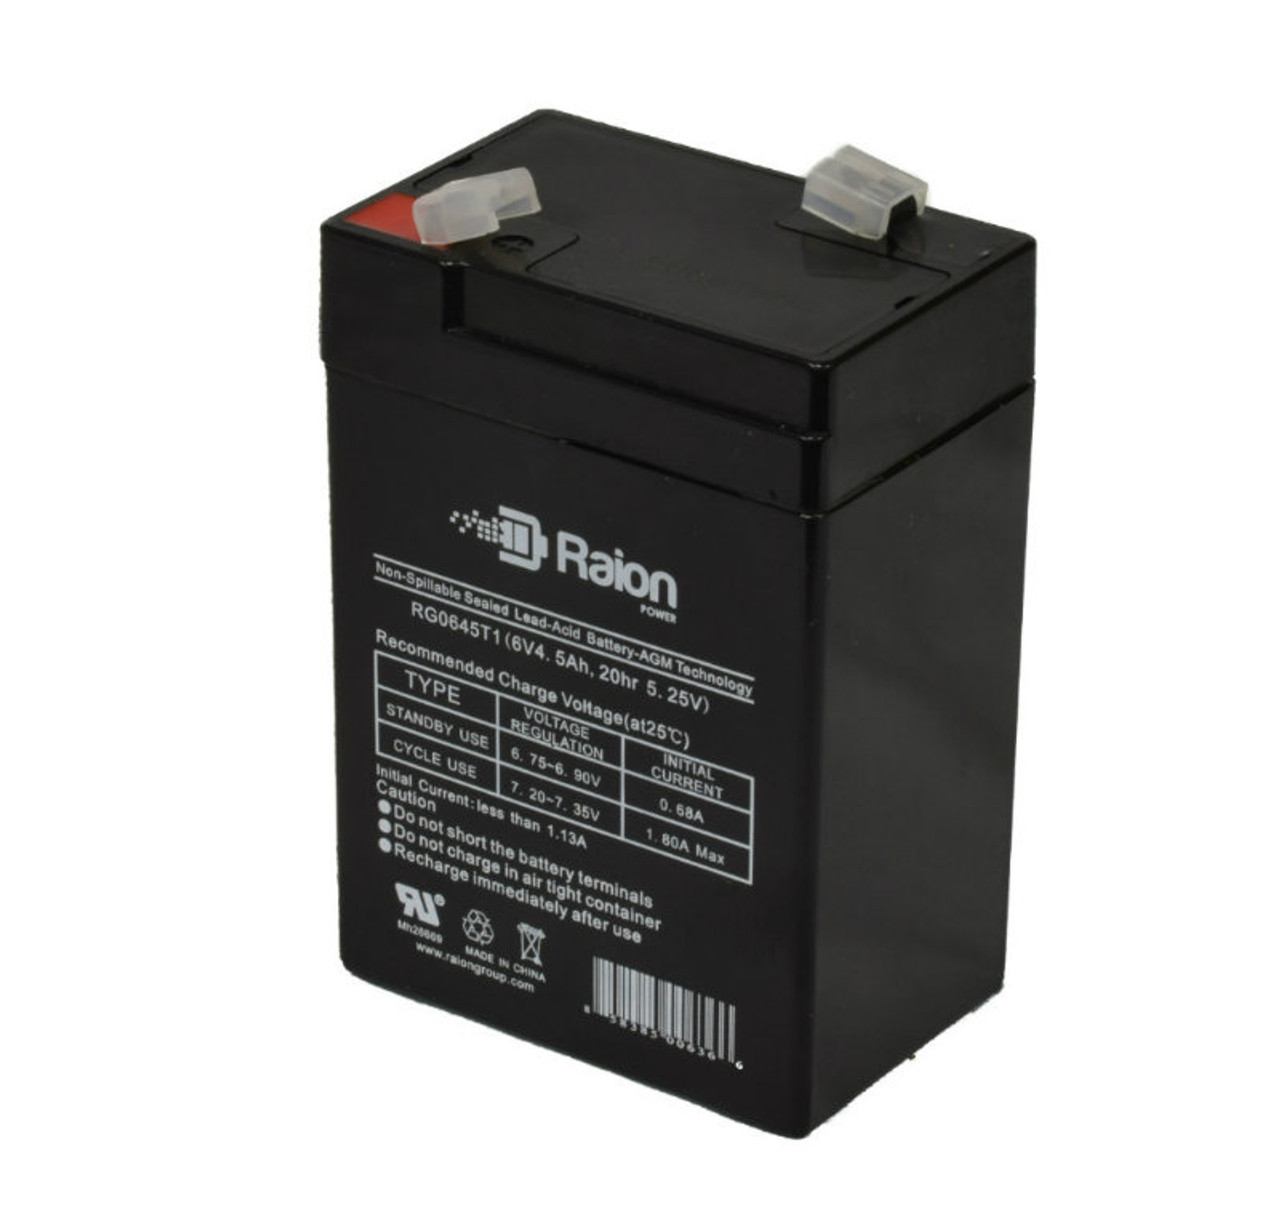 Raion Power RG0645T1 6V 4.5Ah Replacement Battery Cartridge for AJC C4S